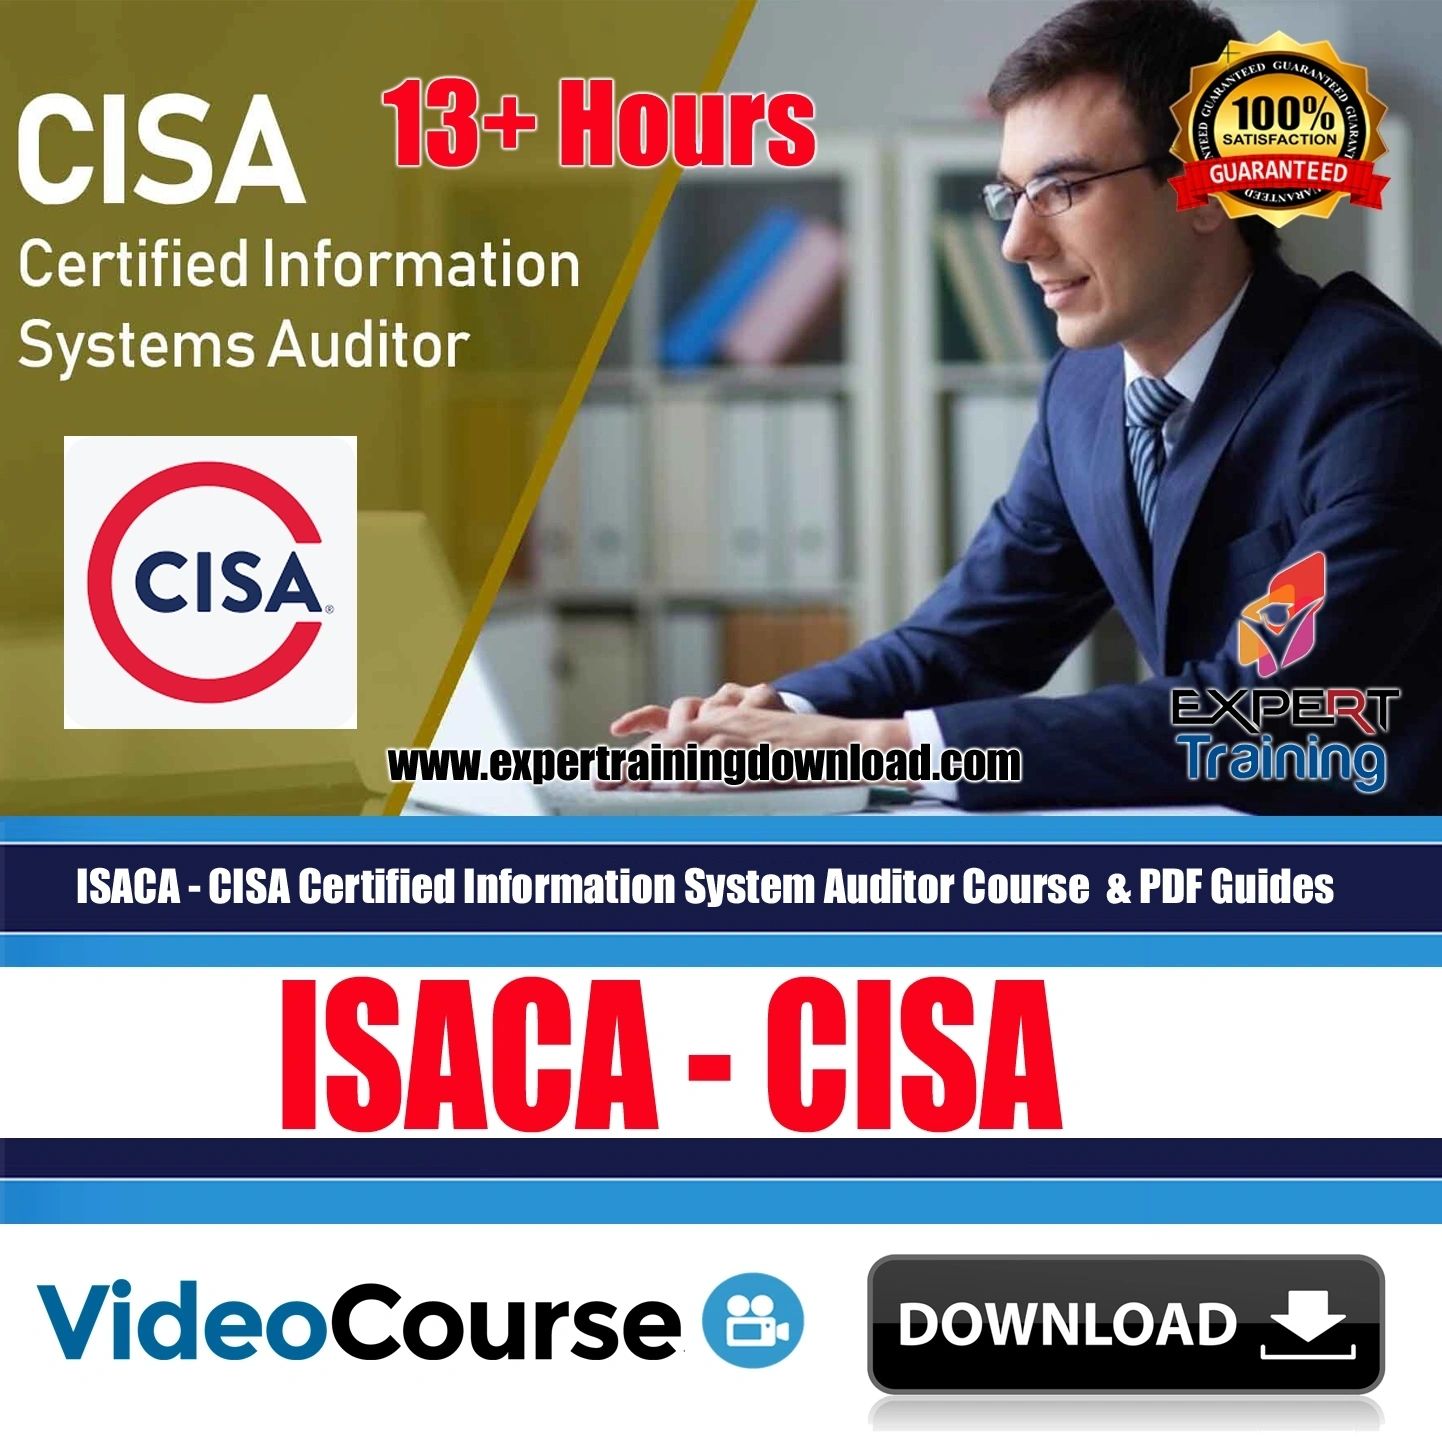 ISACA – CISA Certified Information System Auditor Course & PDF Guides